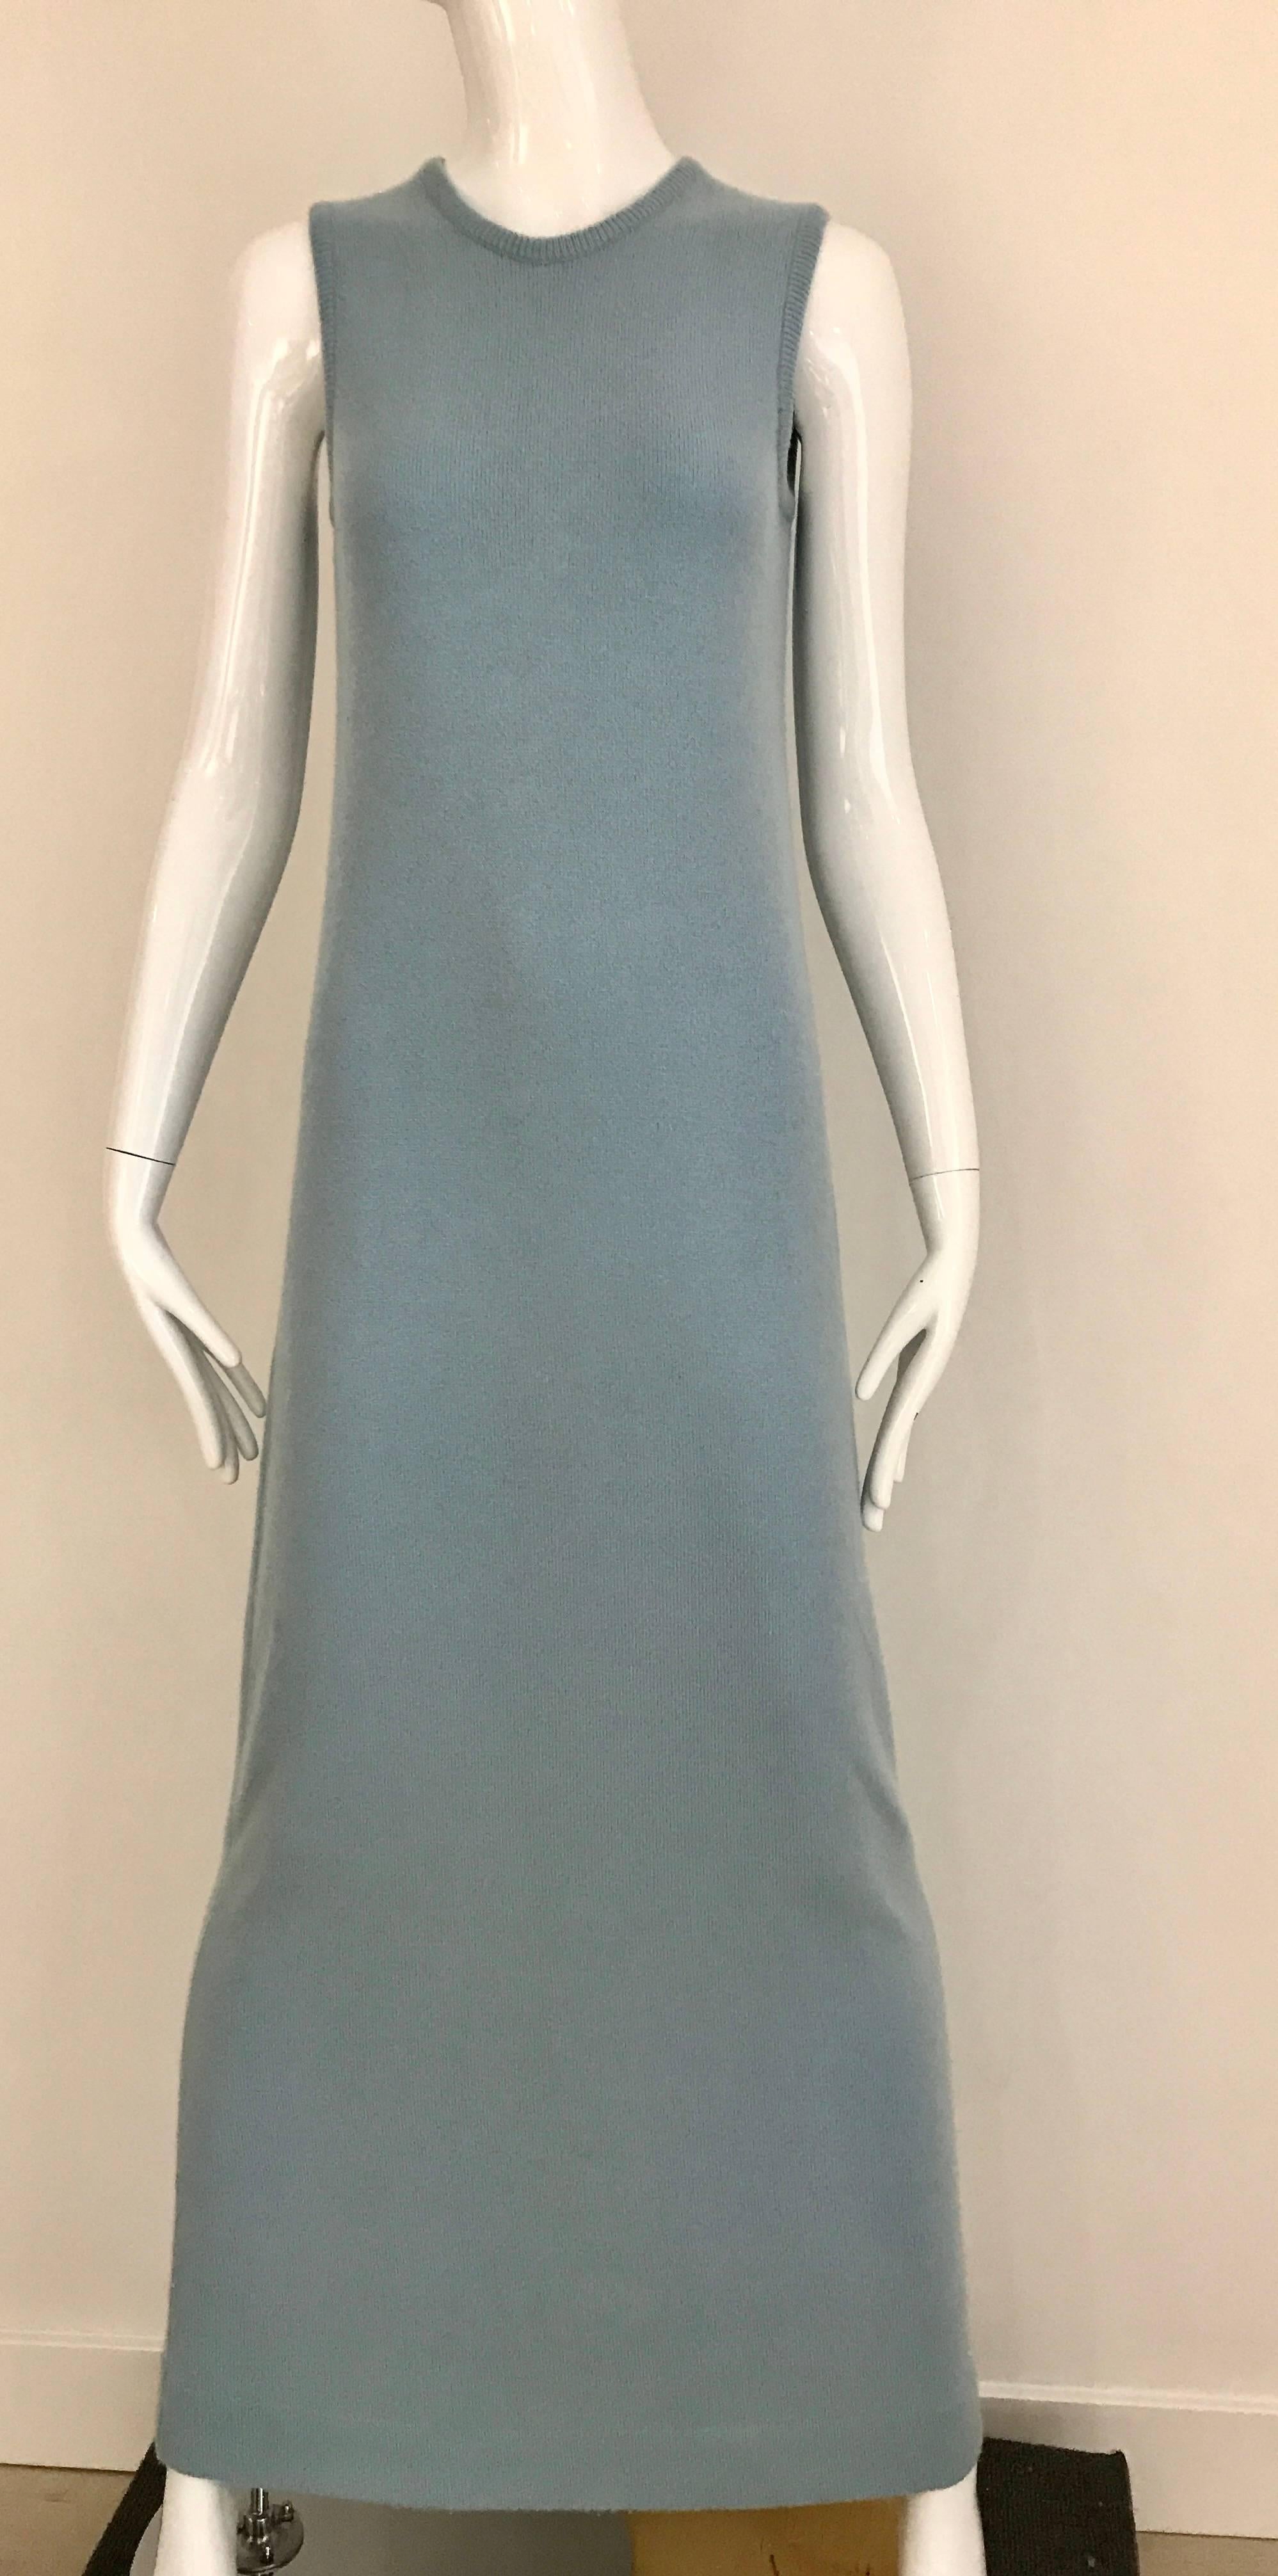 1970s HALSTON Baby Blue Sleeveless Cashmere Sweater 70s maxi Dress. 
Fit Size 2/4/6
Bust: 32 - 36 inch
Waist: 32- 36 inch
Hip : 36 - 38 inch  / Dress Length:  55 inch
**** This Garment has been professionally Dry Cleaned and Ready to wear.
Small